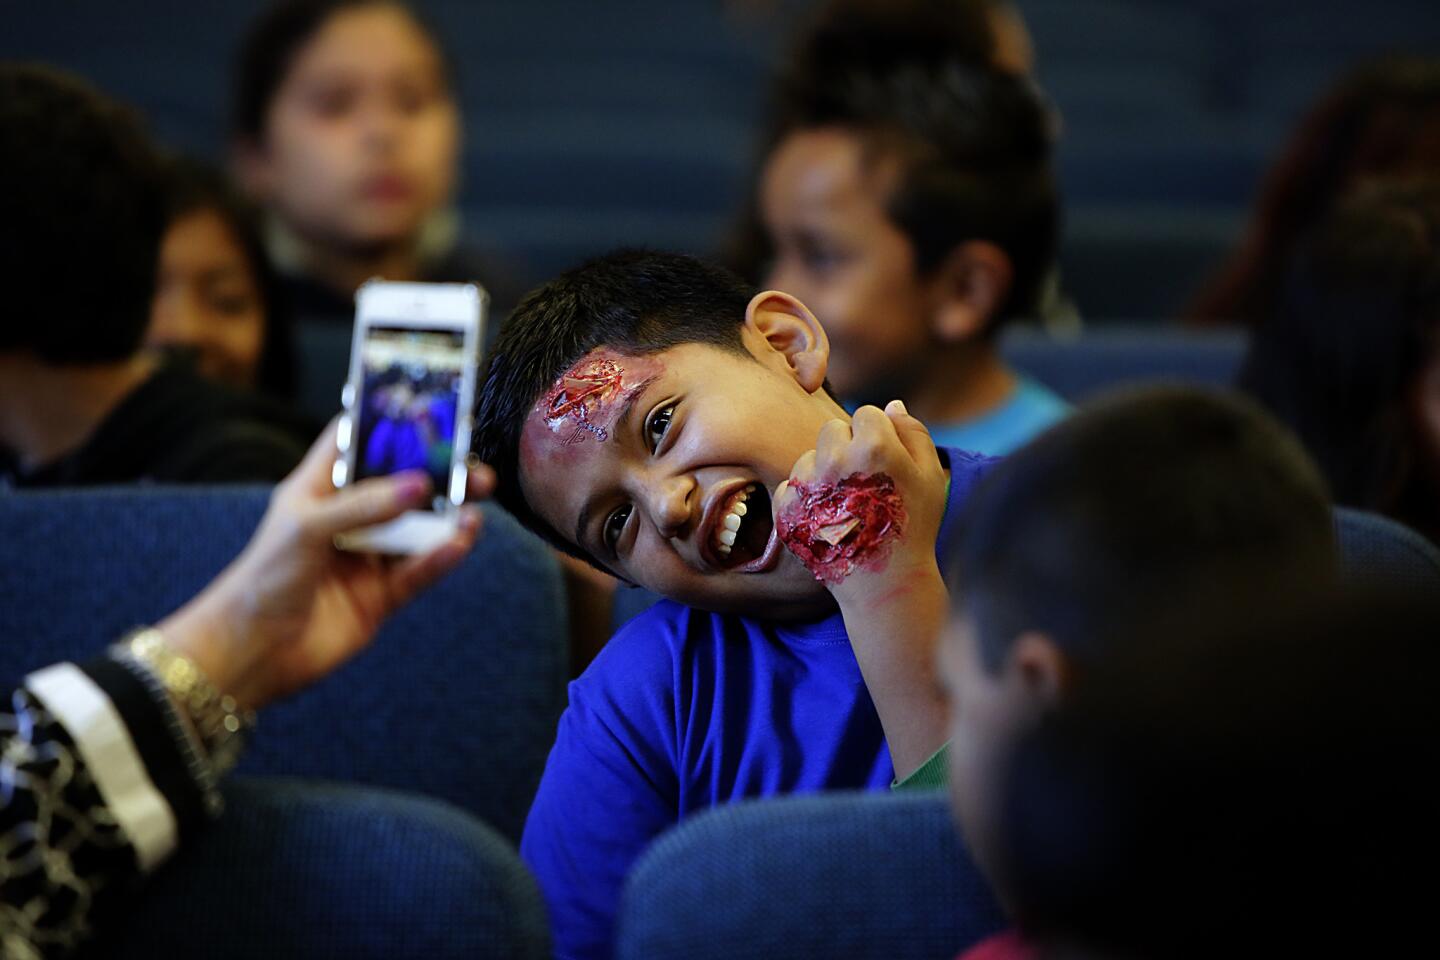 Leobely Hernandez, 11, has his picture taken in character as an earthquake victim, complete with fake gory injuries, before the Great California ShakeOut, a quake safety and preparedness drill, got underway at Rosemont Avenue Elementary School in Echo Park.